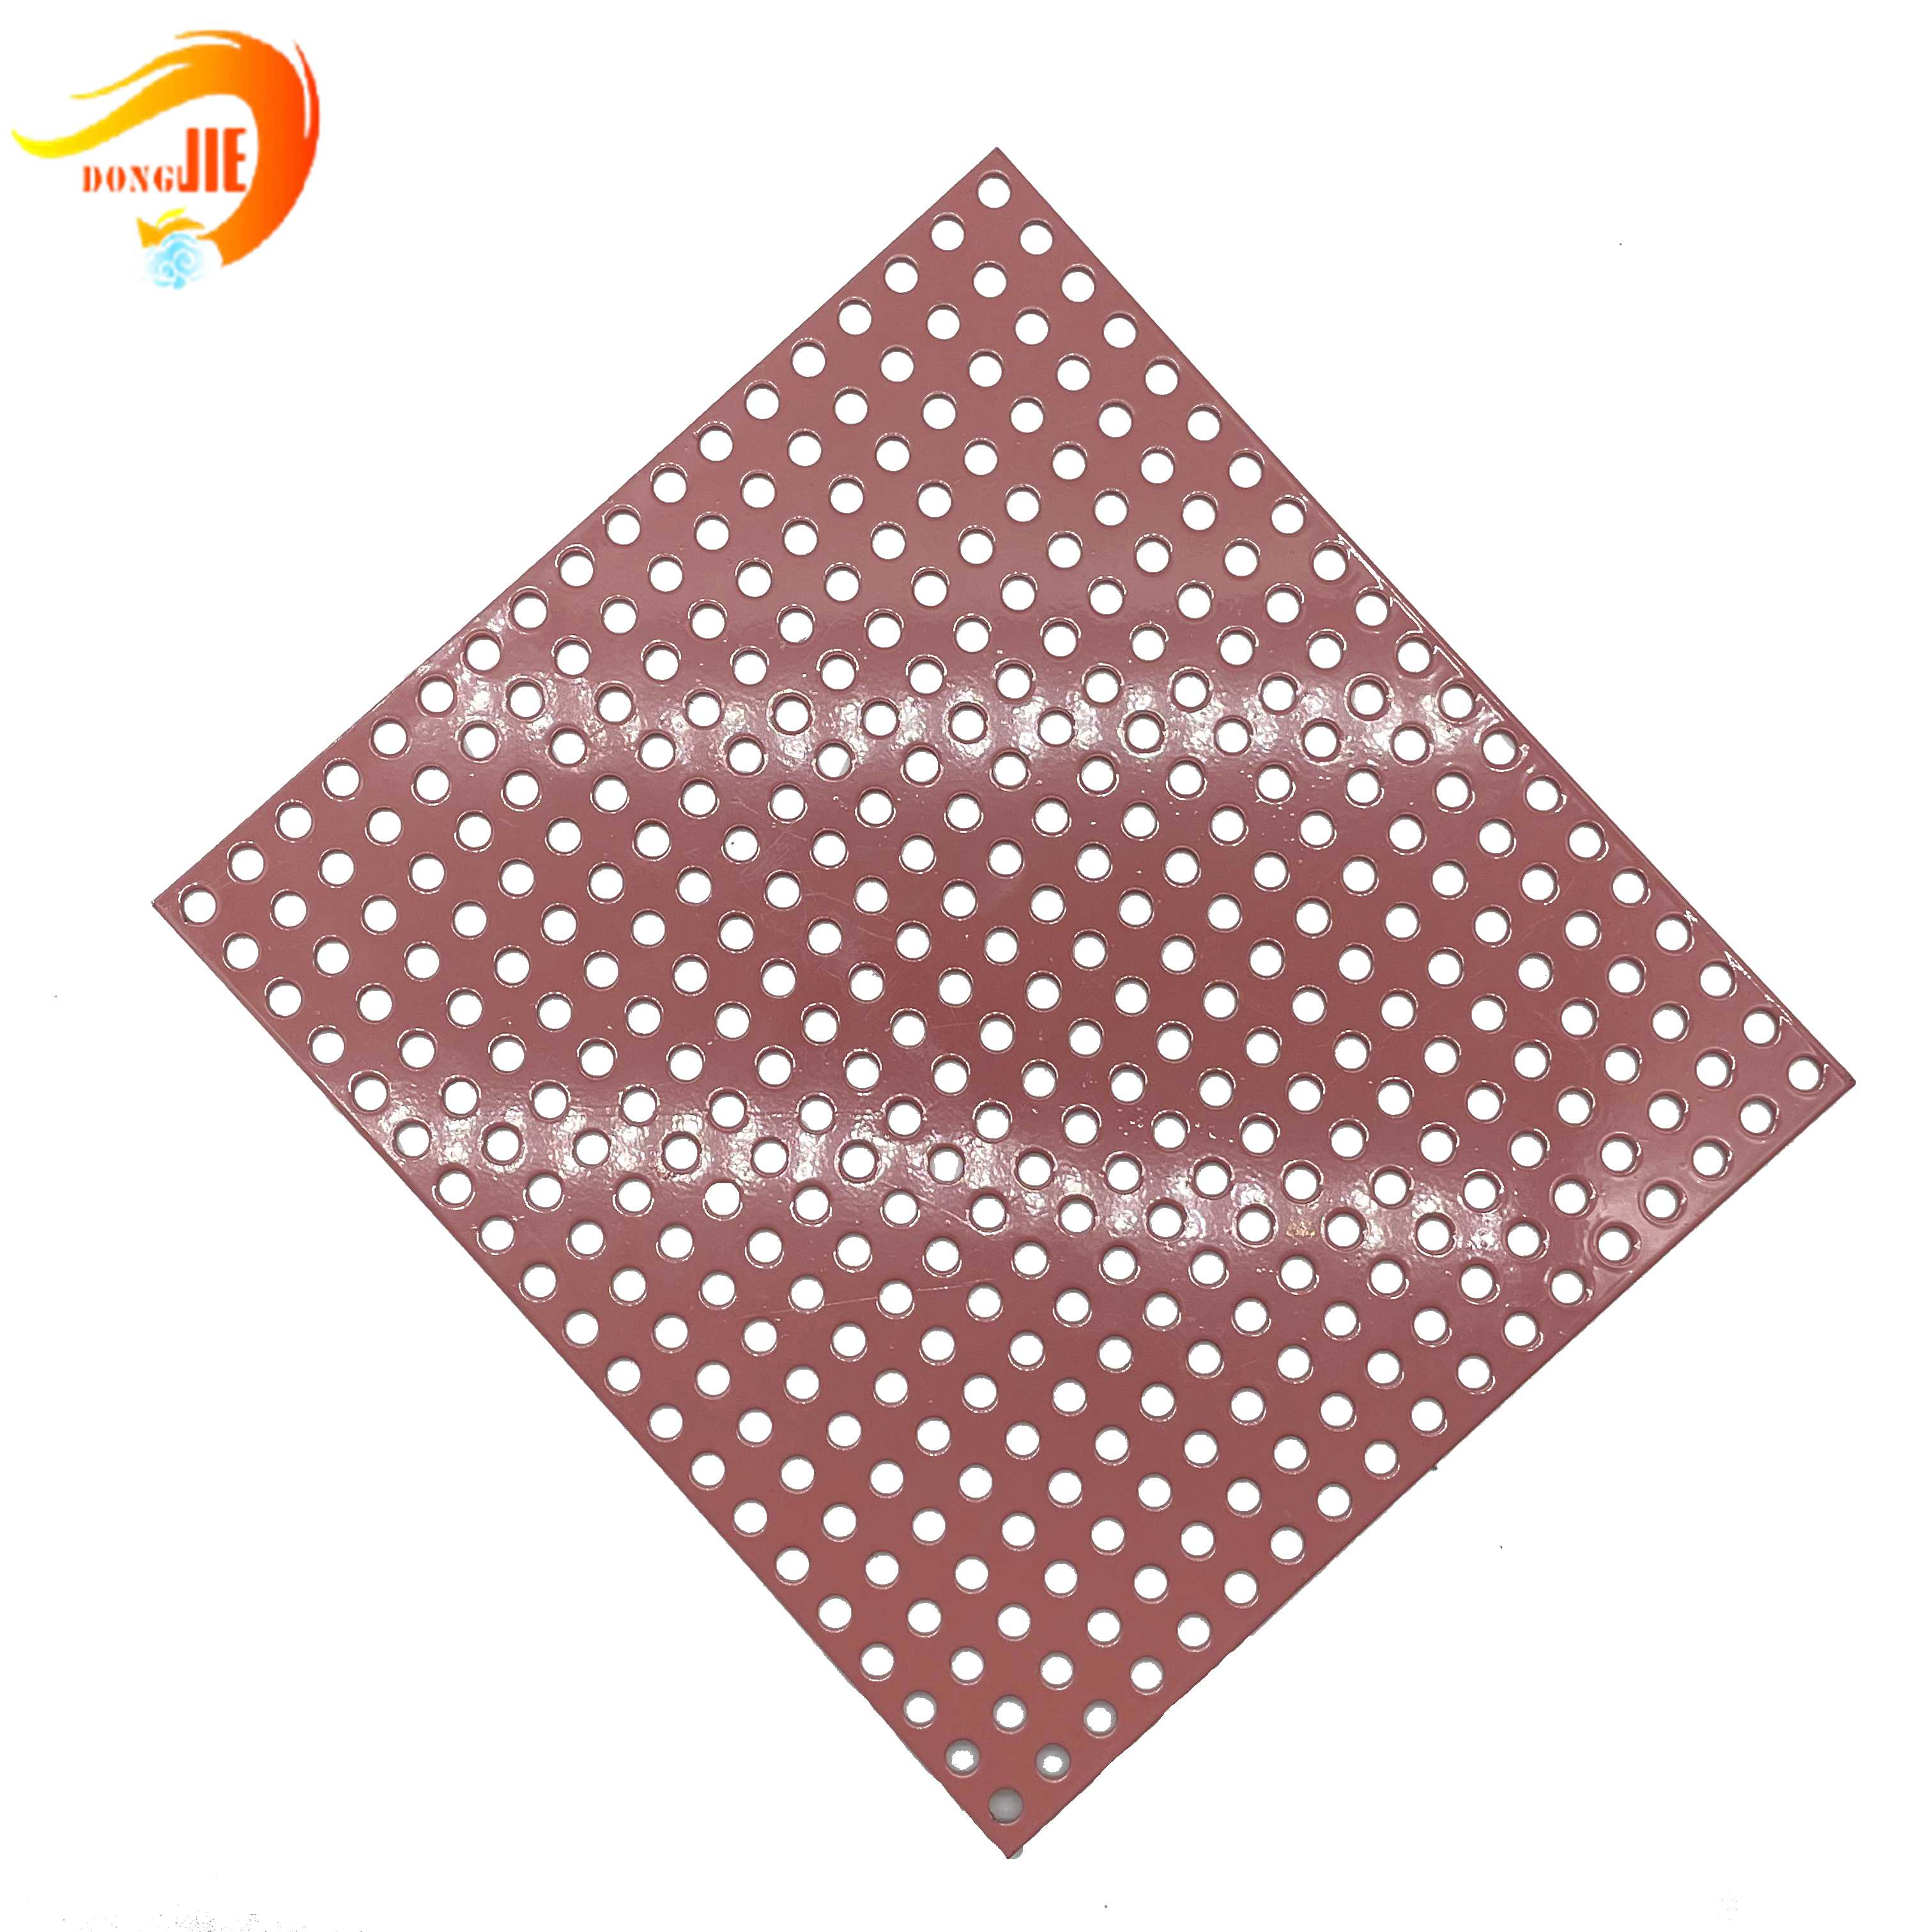 Decorative Aluminum Perforated Metal Sheet for Ceiling tiles Featured Image